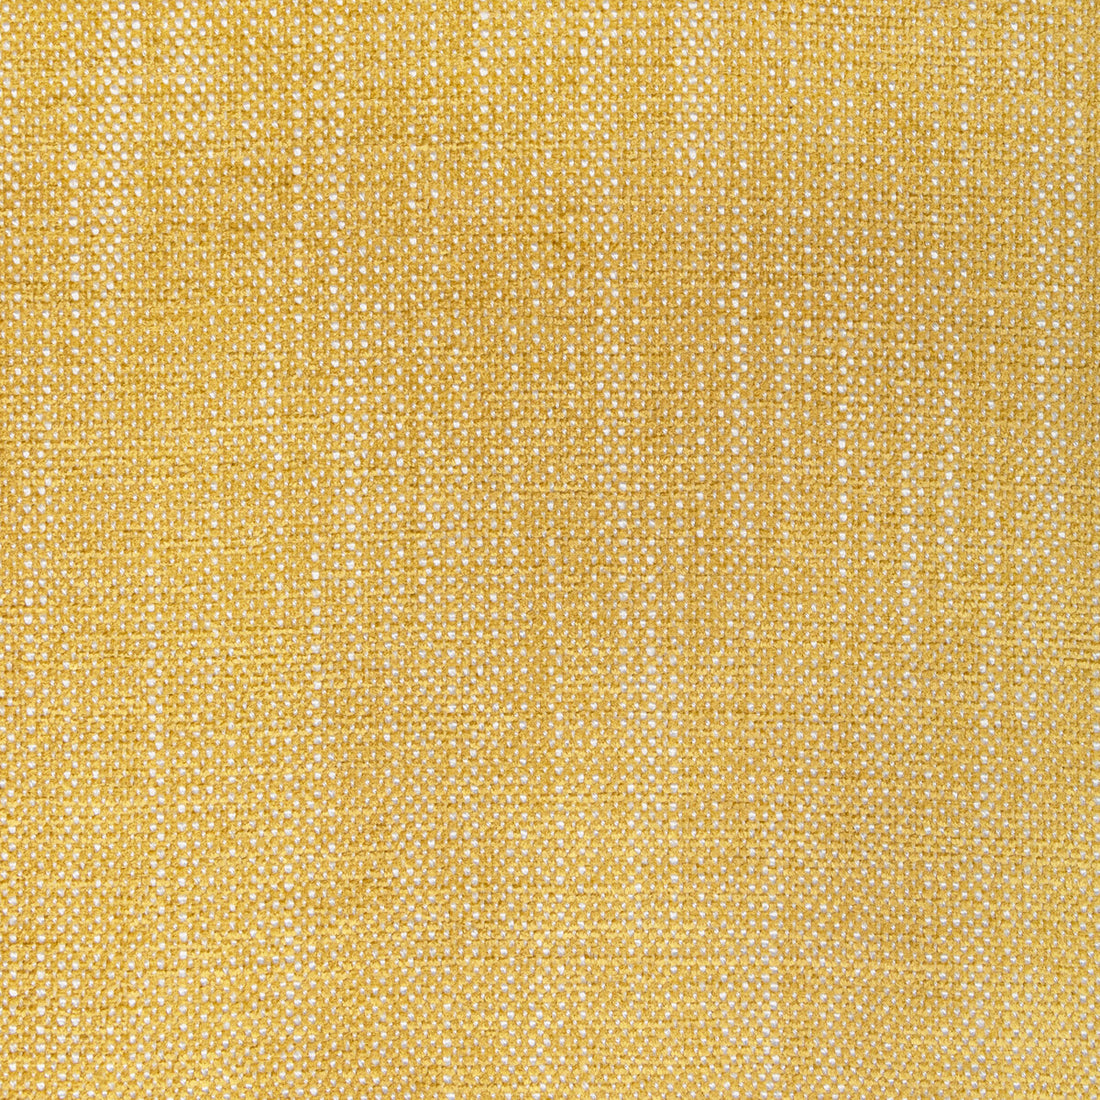 Kravet Design fabric in 36408-40 color - pattern 36408.40.0 - by Kravet Design in the Performance Crypton Home collection